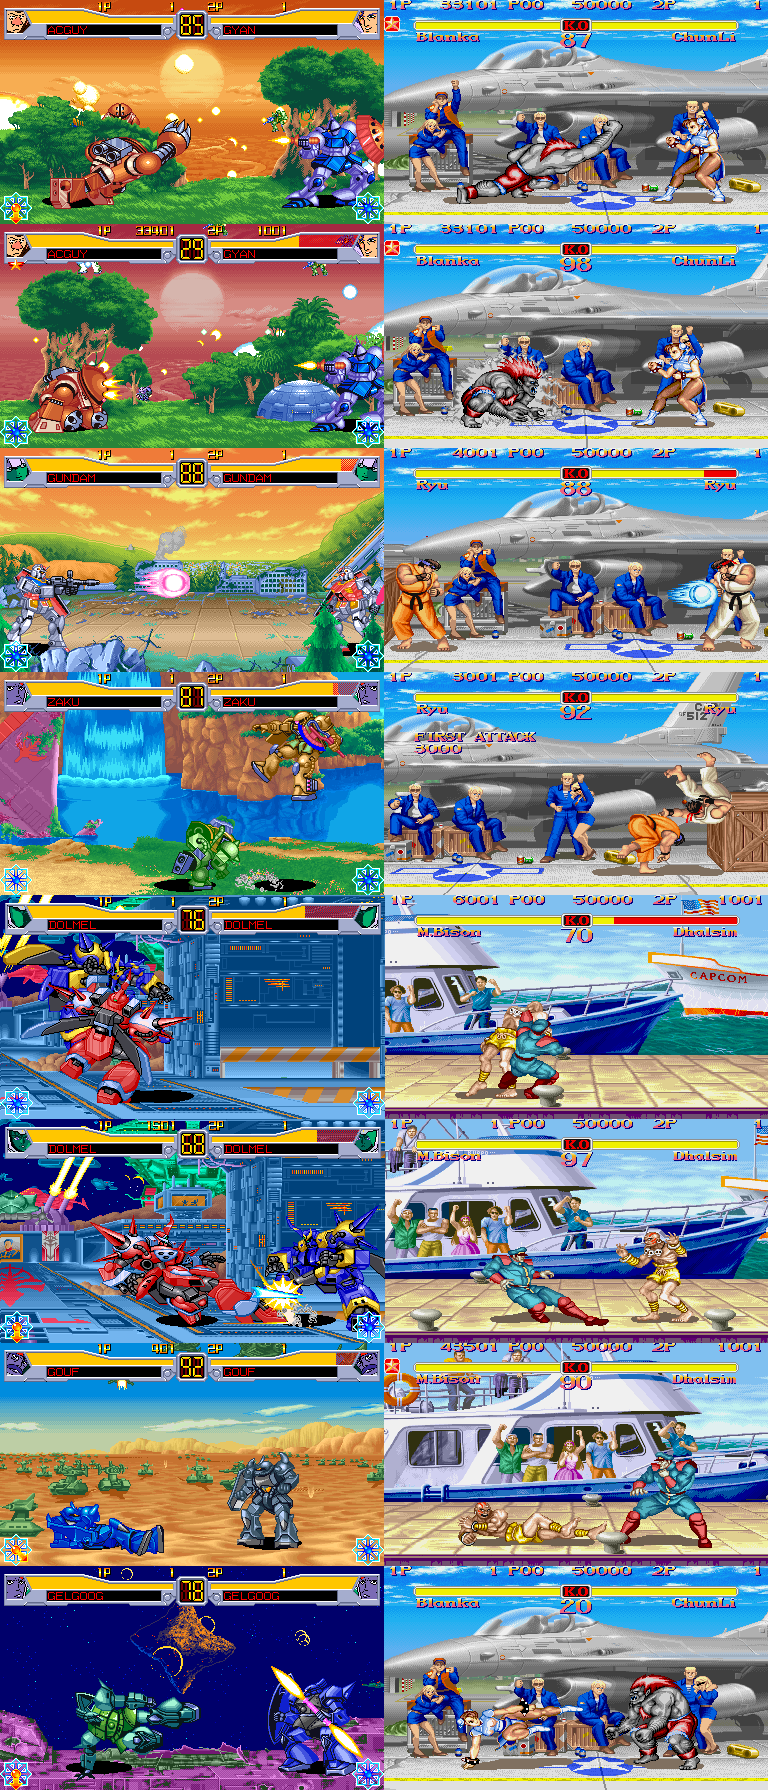 Side-by-side screenshots of Ex Revue's spritework being, uh, "very closely inspired" by Street Fighter II spritework